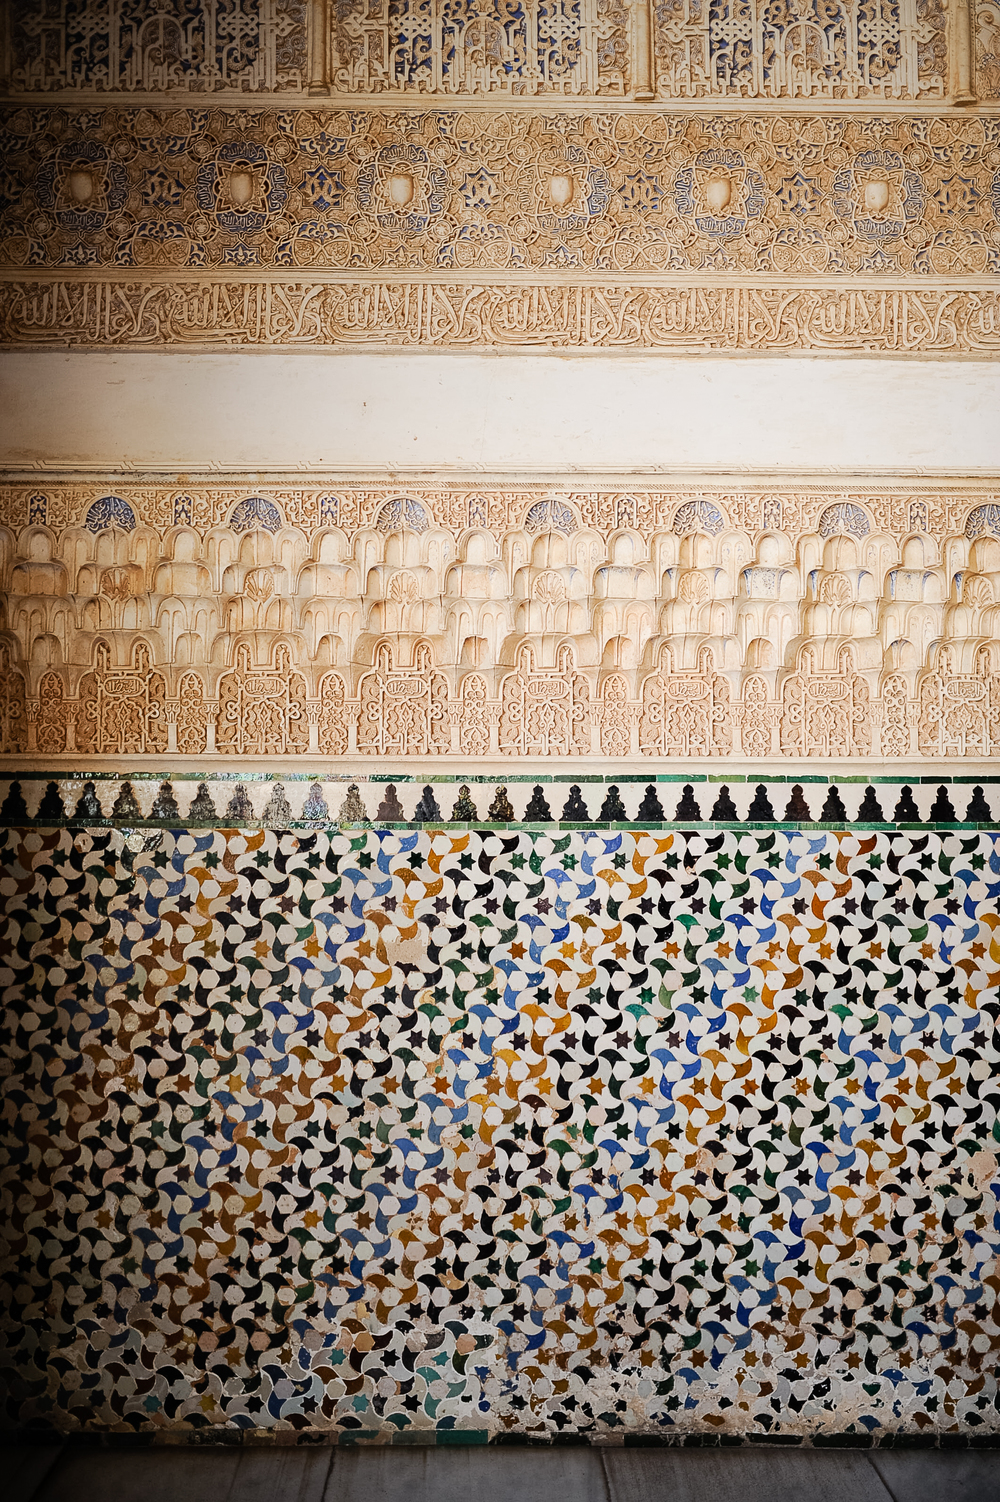  Arabic decoration uses no animal or human figures only "arabesque" geometric figures and inscriptions. &nbsp;Over and over, around the walls, is inscribed "The only victor is Allah." &nbsp;(Wherever you see the slight "W") 